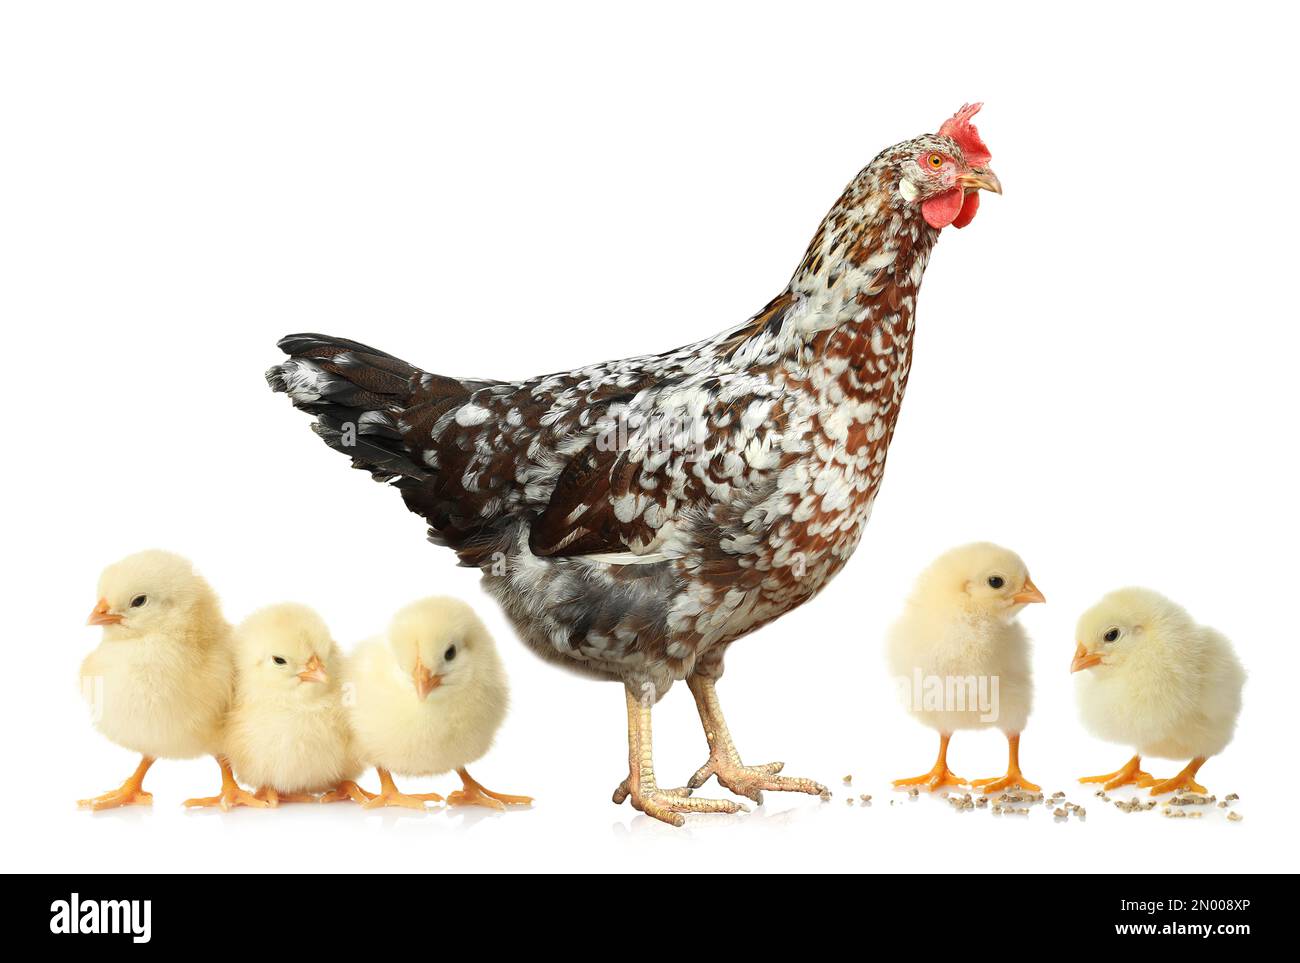 Hen with cute chickens on white background Stock Photo